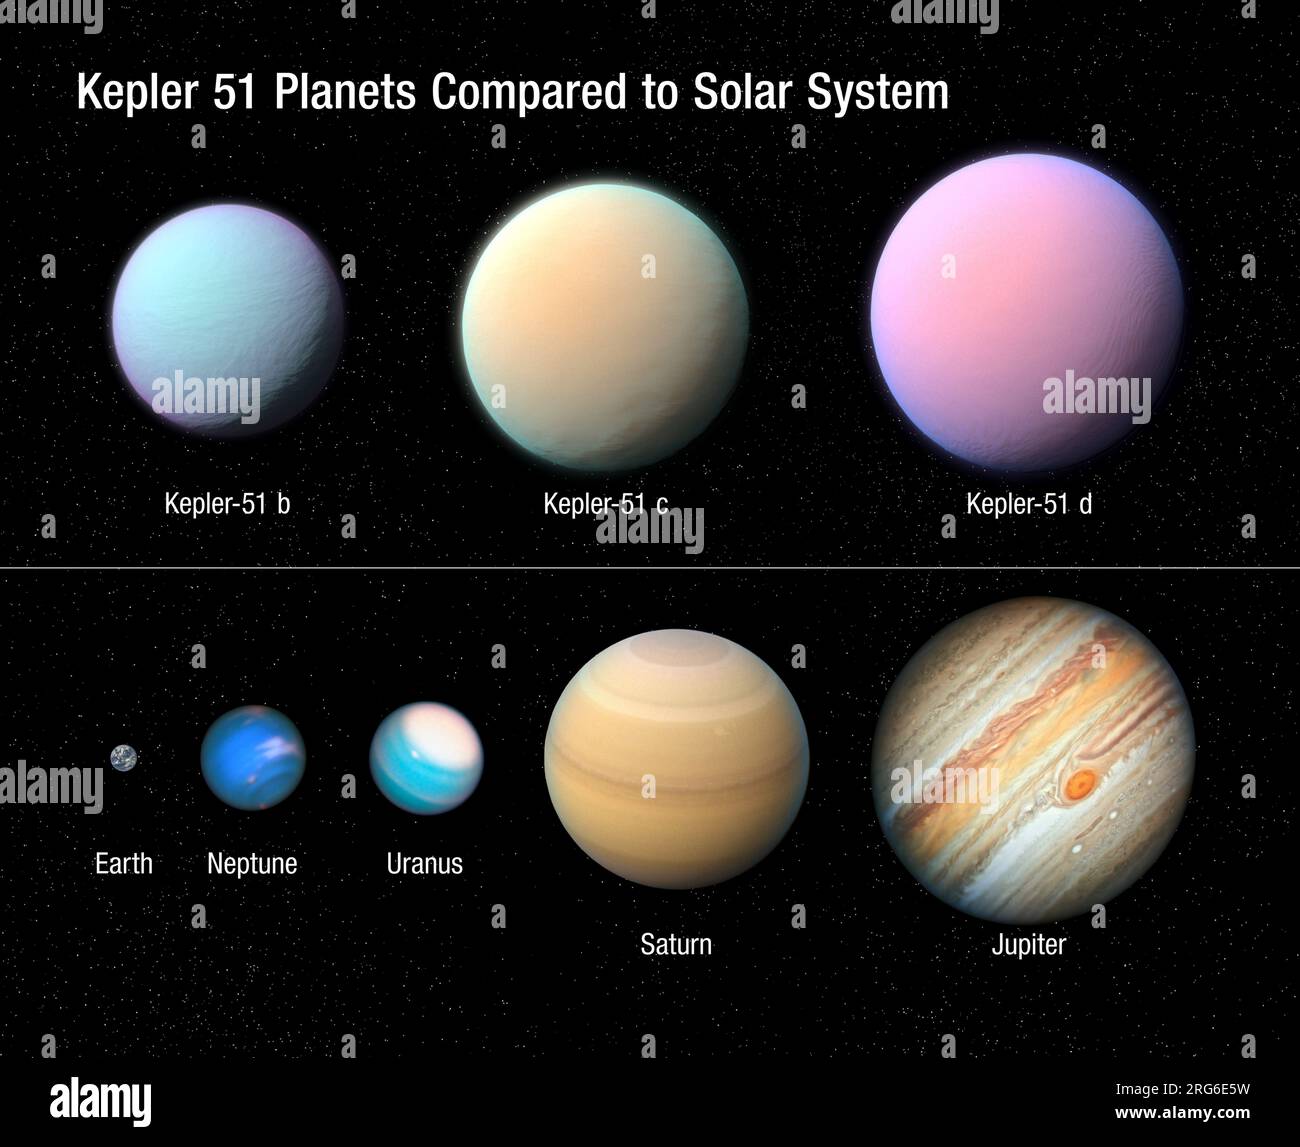 Illustration depicting the three giant planets orbiting the Sun-like star Kepler 51 as compared to some of the planets in our solar system. Stock Photo